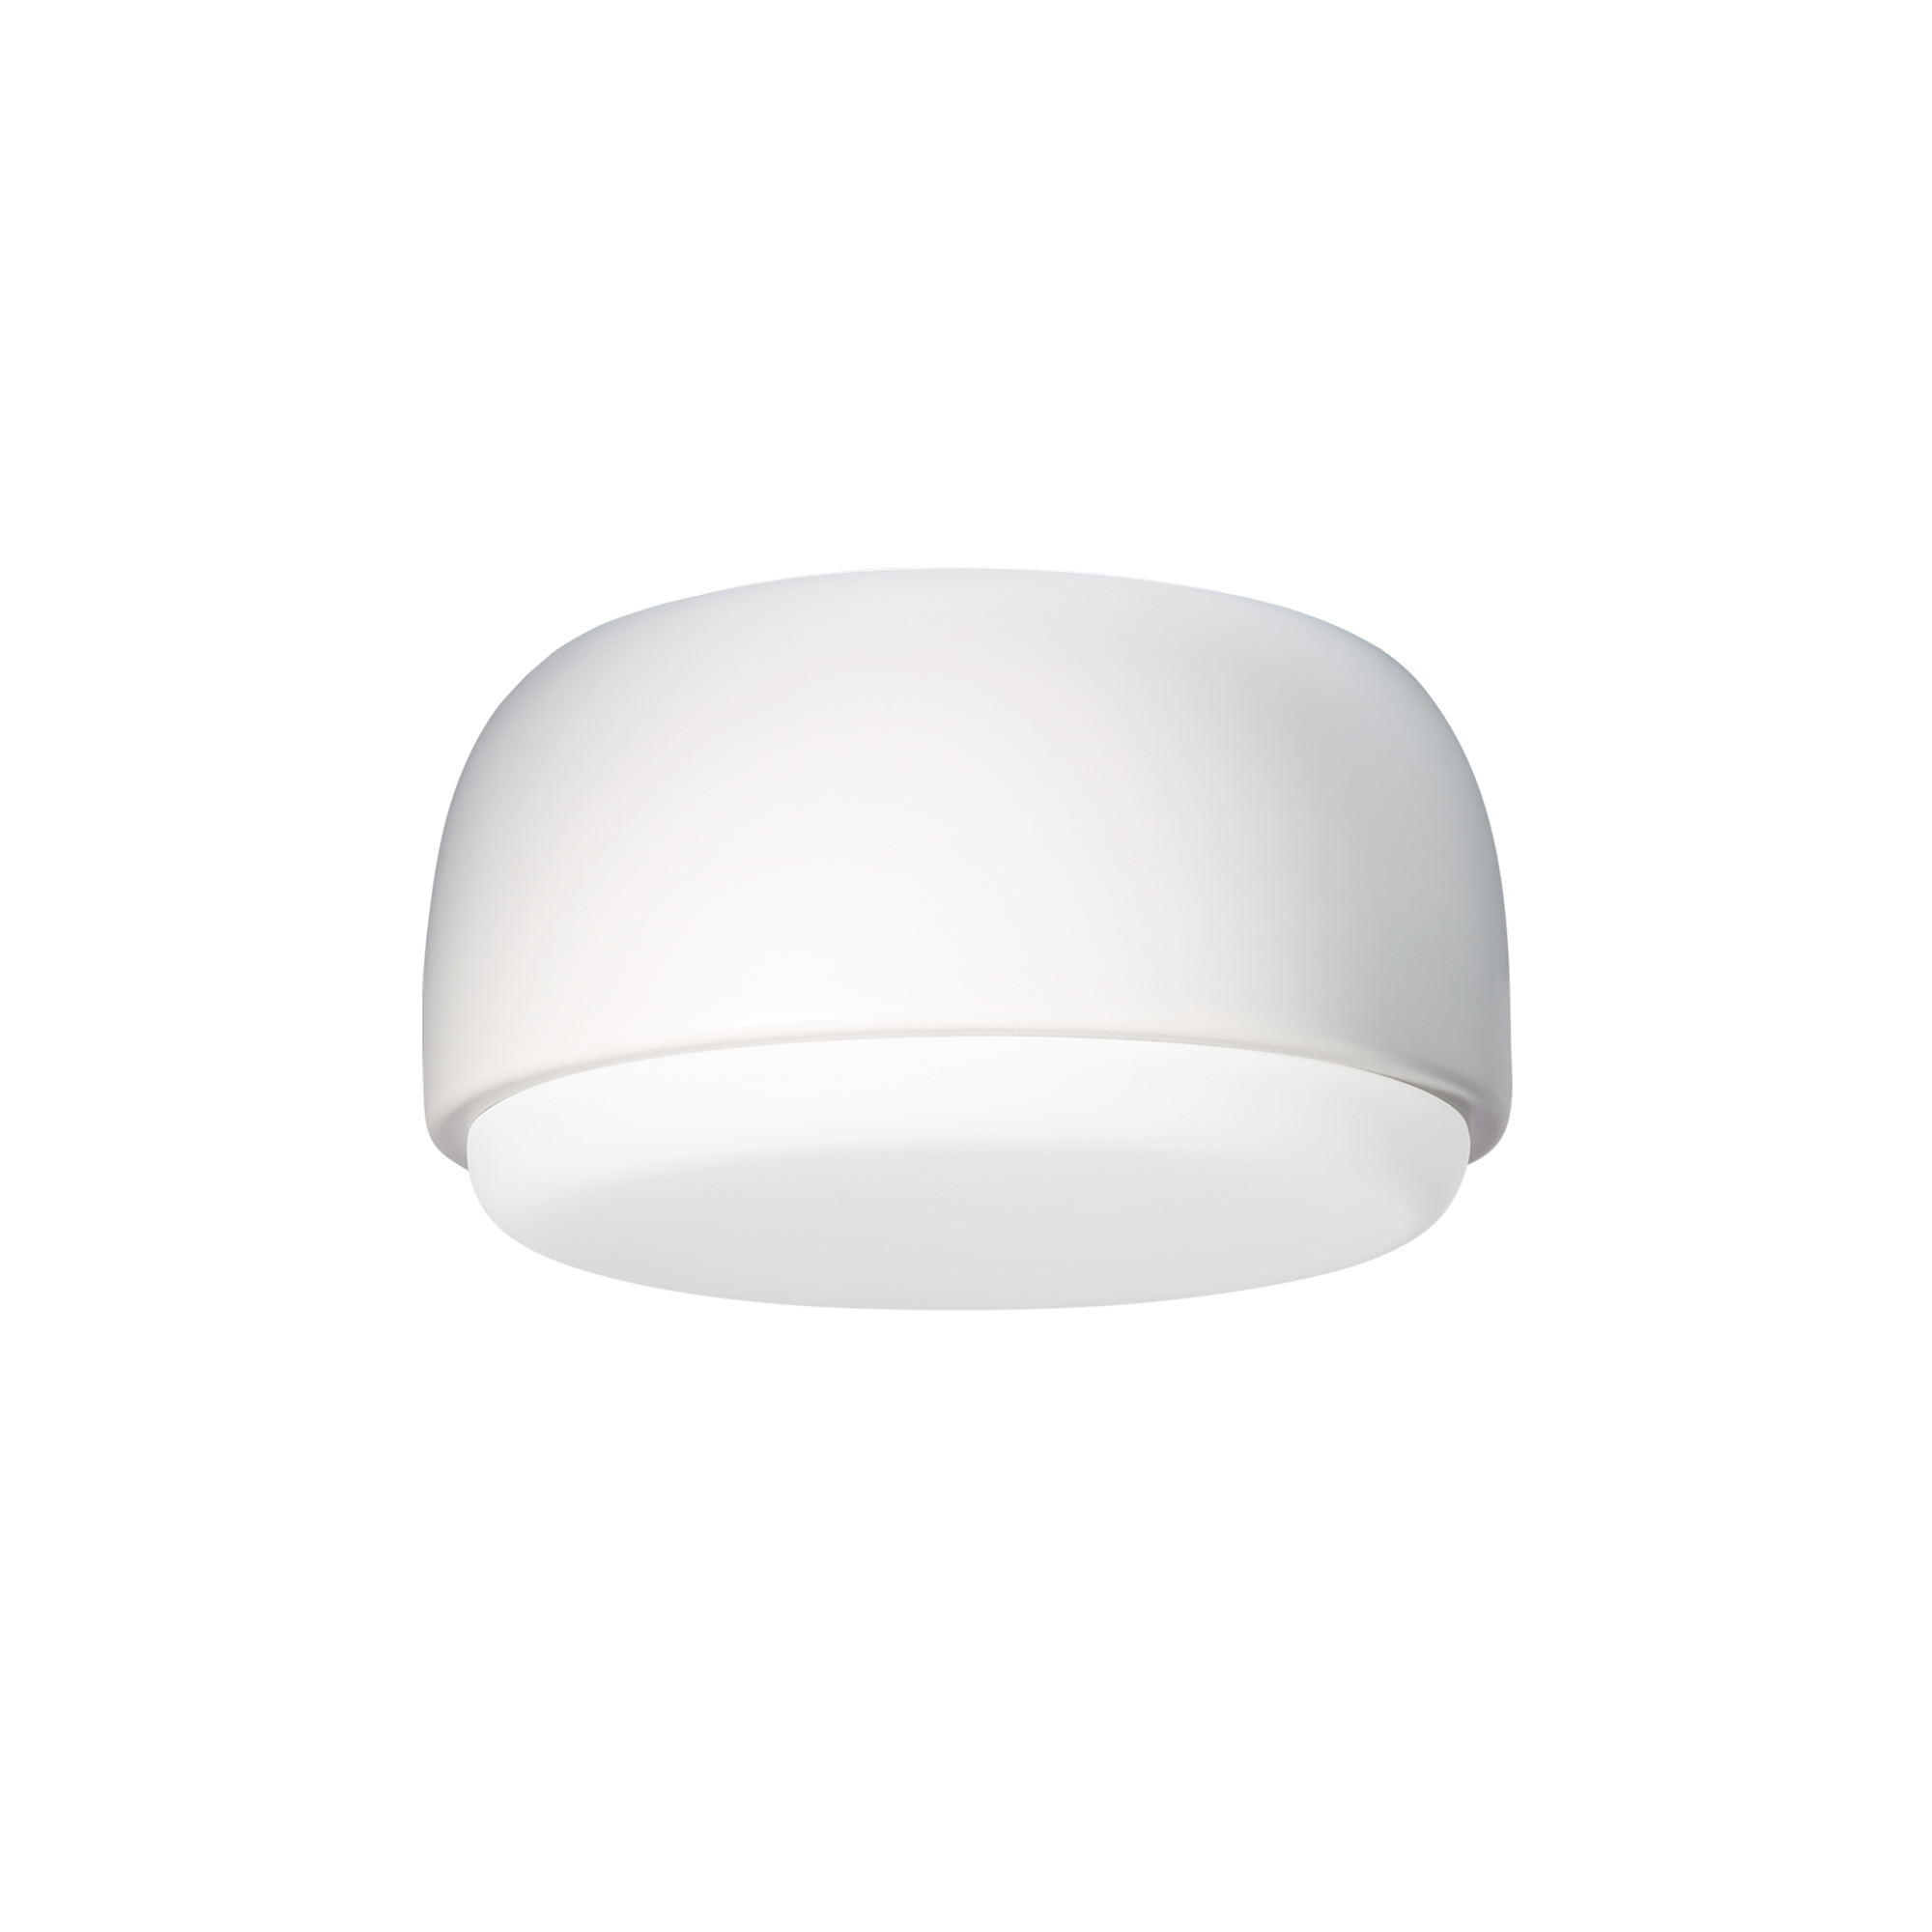 Northern - Over Me D20 Wall/Ceiling Lamp - wei/H x  12.5x20cm/exkl. LED/E27/2x7W/220-240V 50Hz